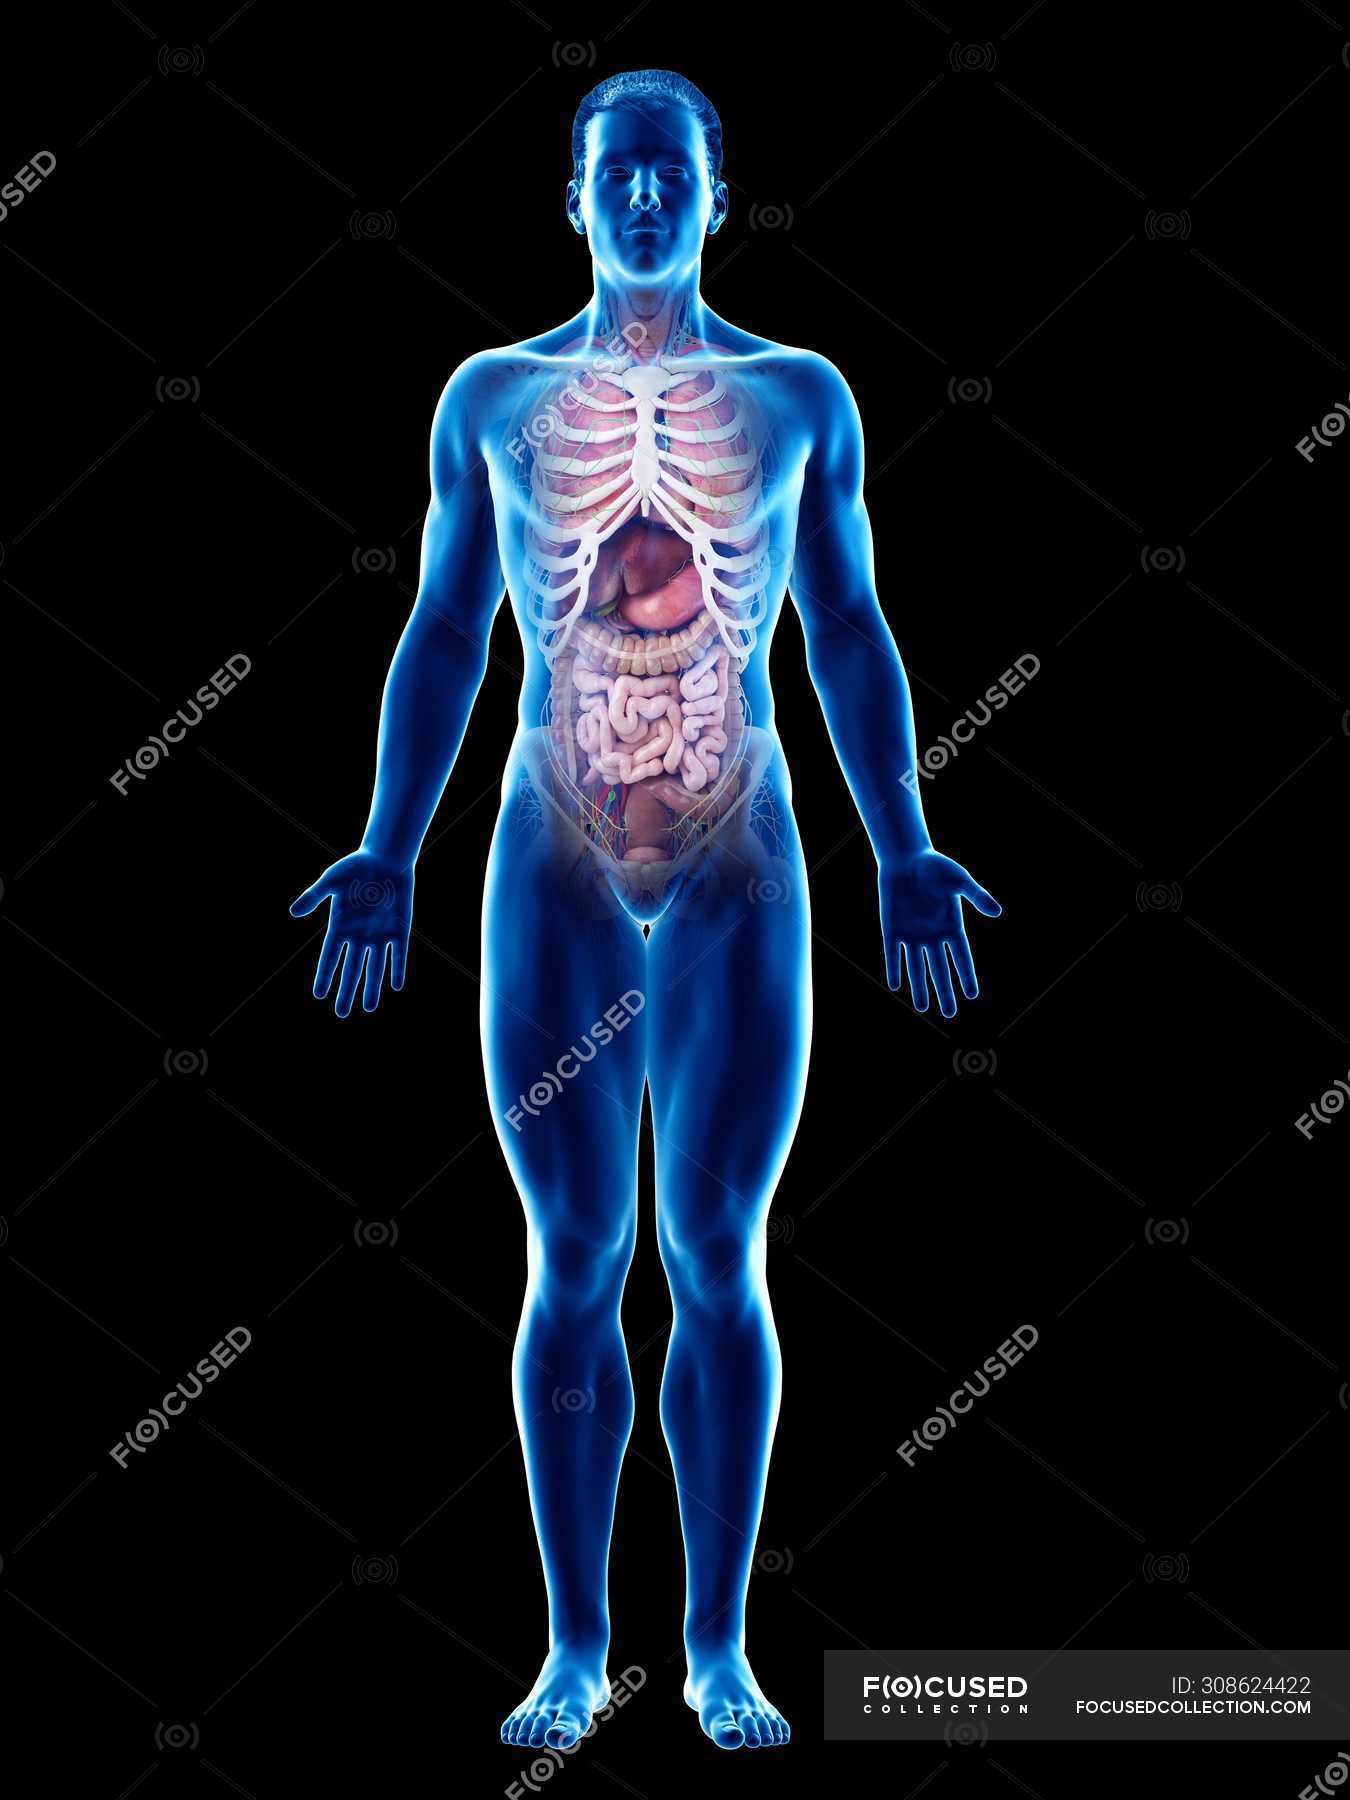 Image Showing Internal Organs In The Back / Organ Placement Why Some